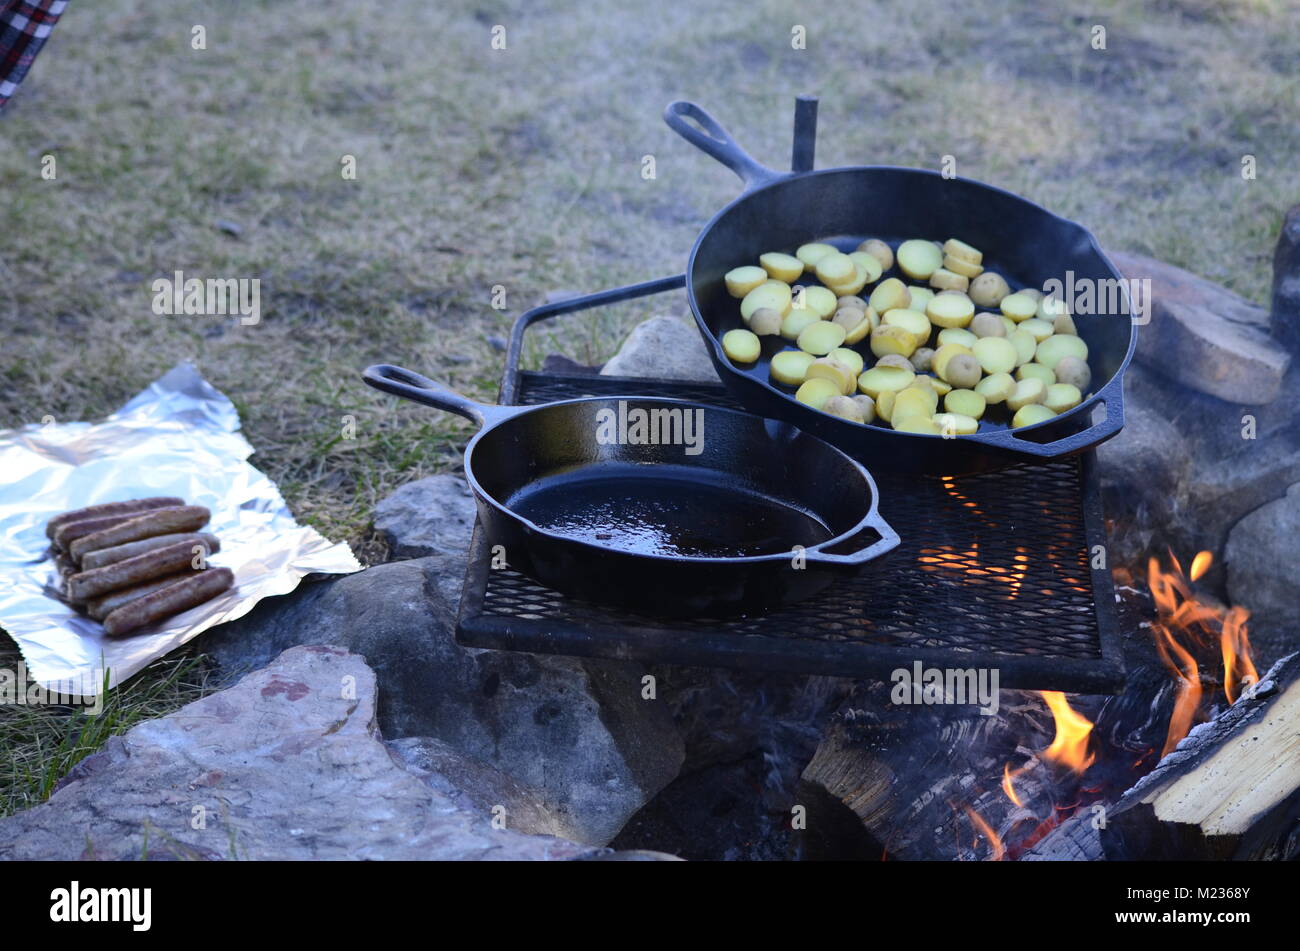 https://c8.alamy.com/comp/M2368Y/two-cast-iron-frying-pans-sit-on-a-grate-over-top-of-a-hot-fire-cooking-M2368Y.jpg